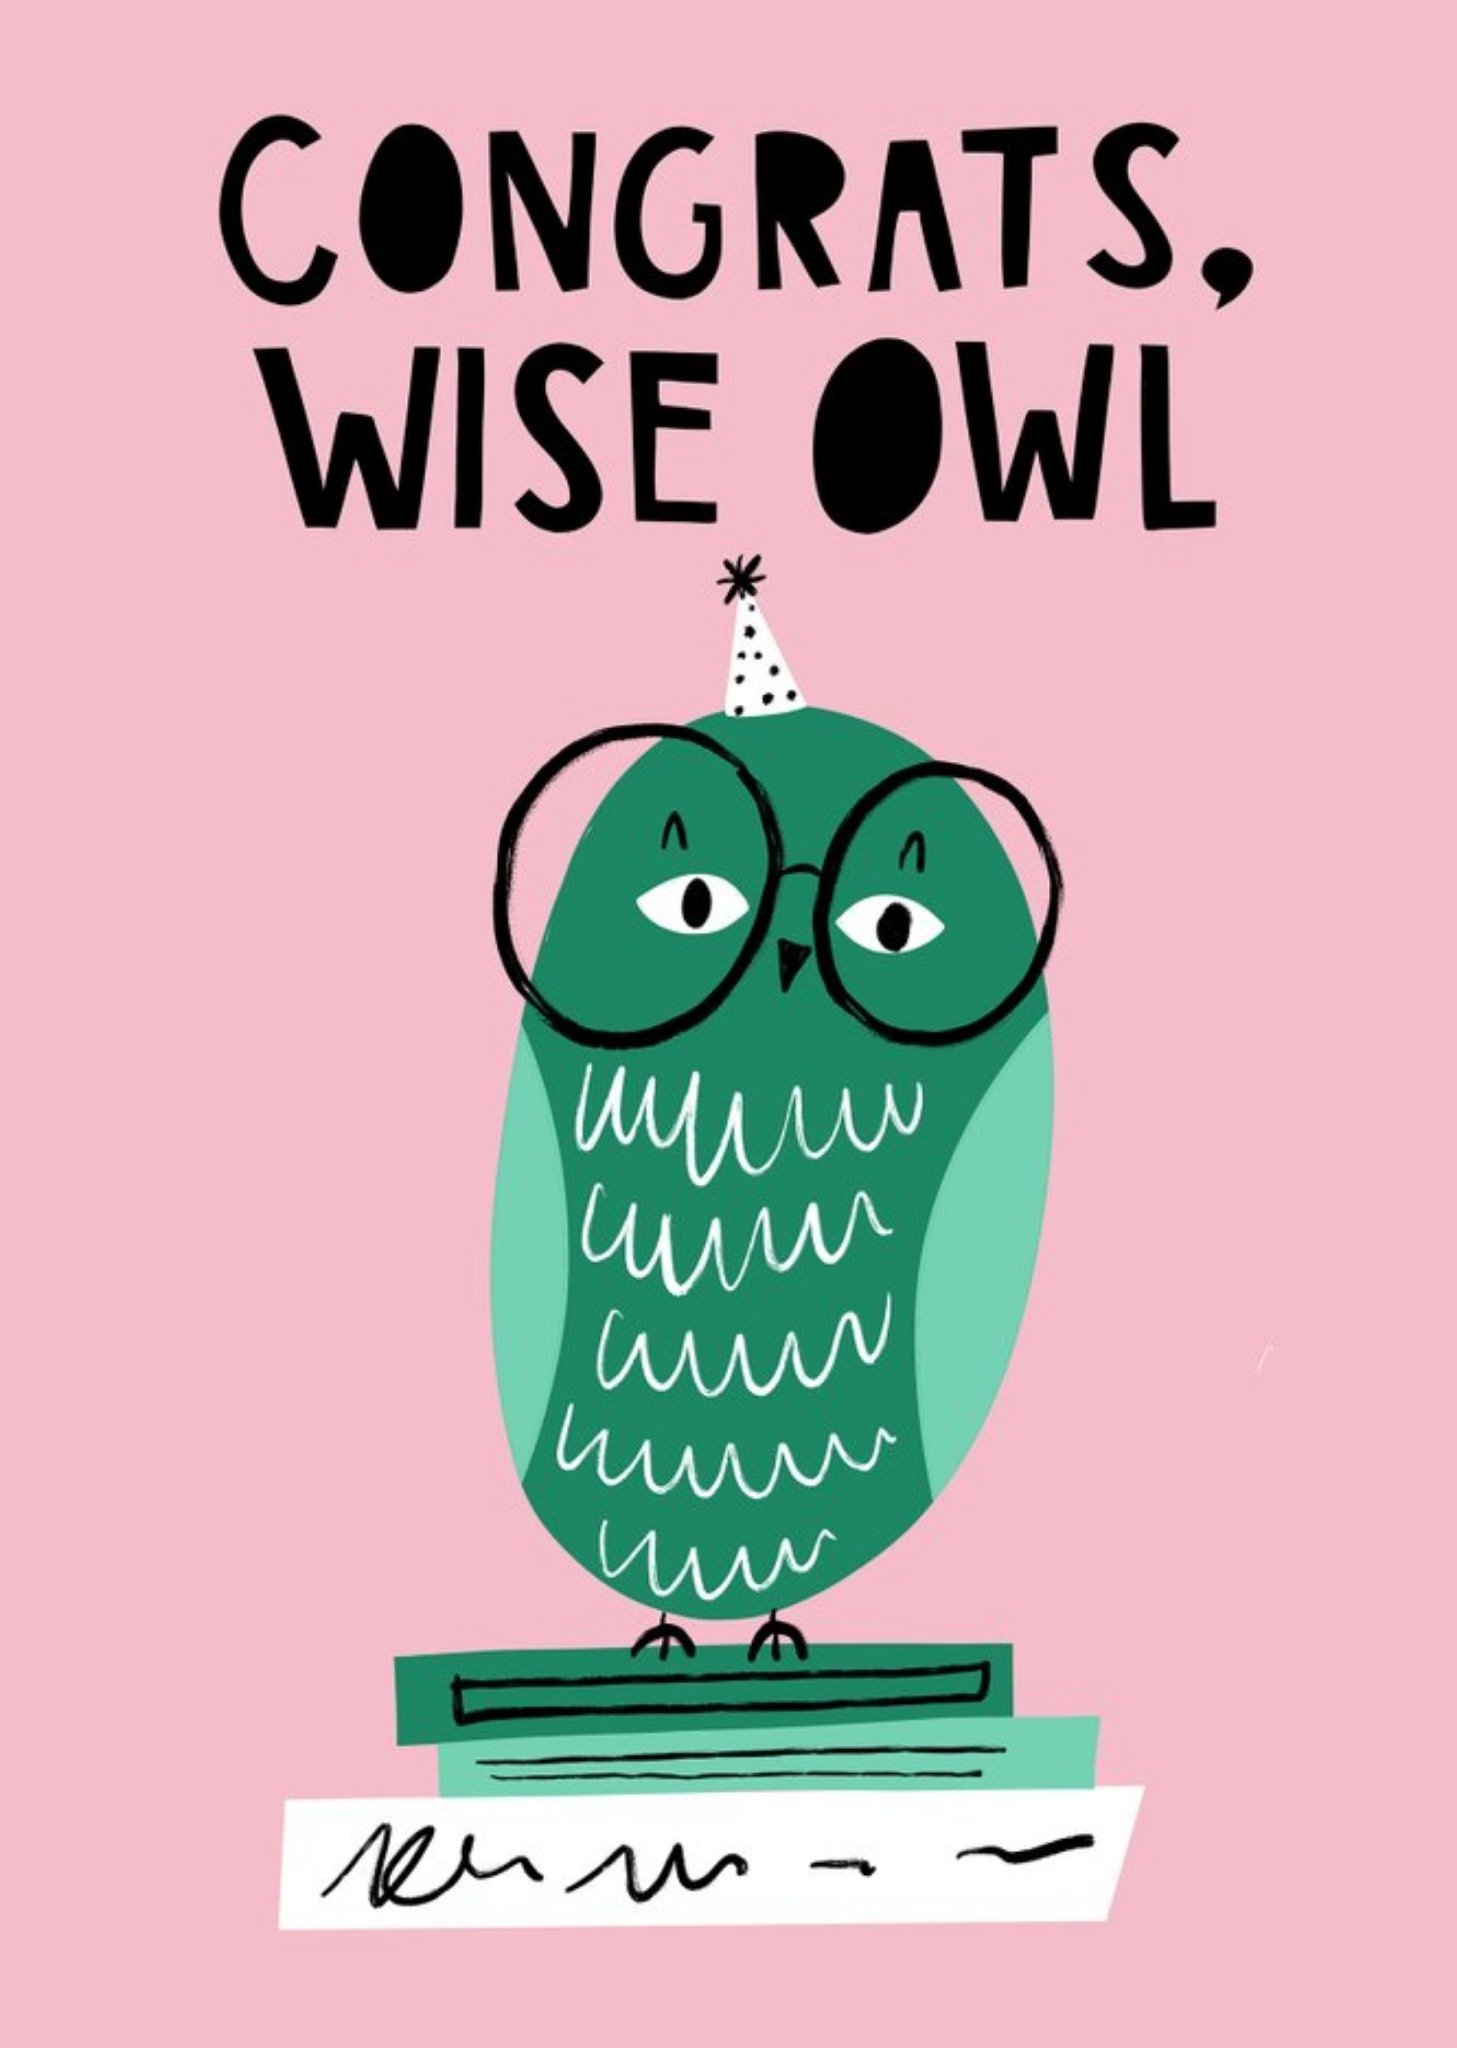 Moonpig Congrats Wise Owl Illustrated Exam Or Graduation Well Done Congratulations Card By Lucy Magg